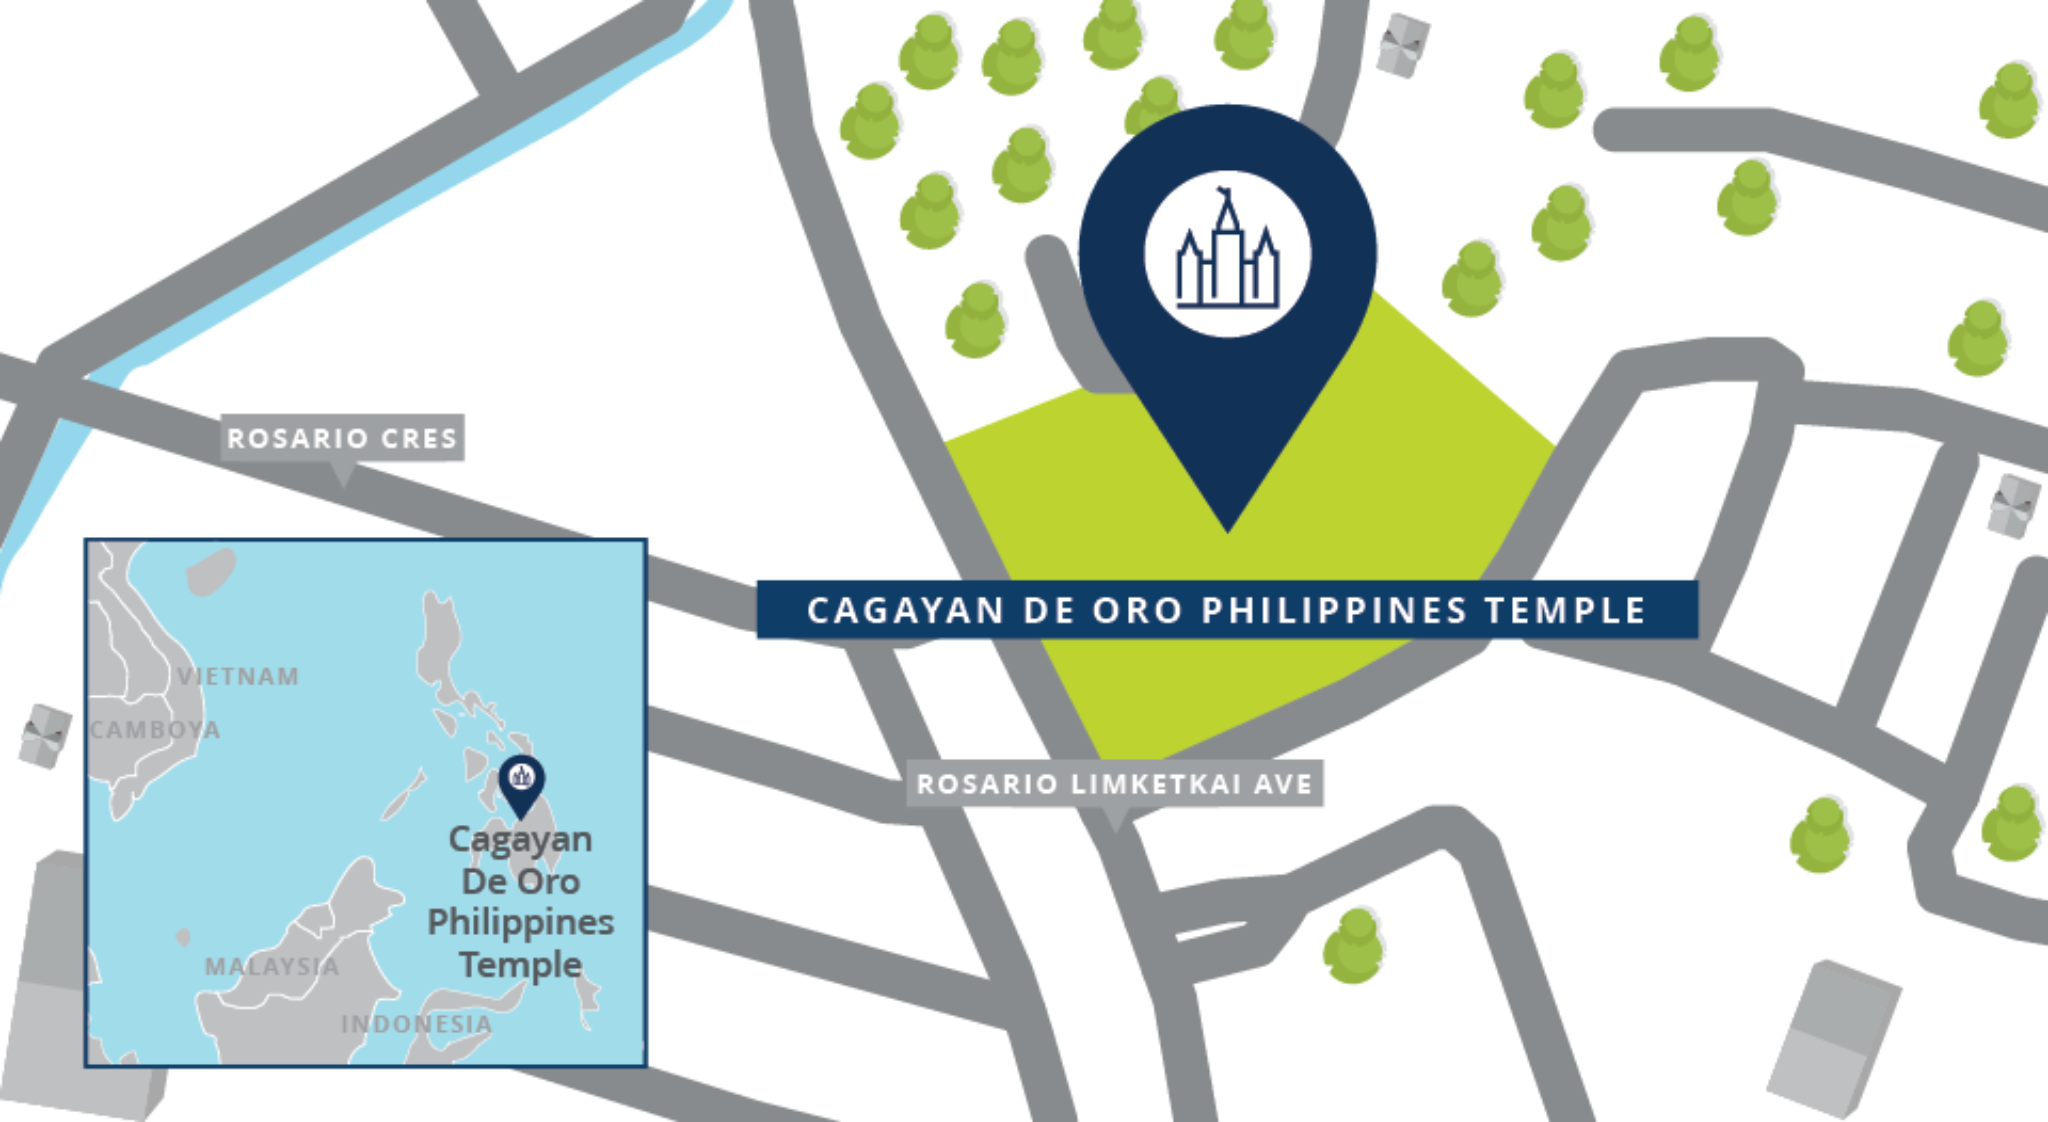 A map with a pin showing the location of the Cagayan de Oro Philippines Temple site, with nearby roads.